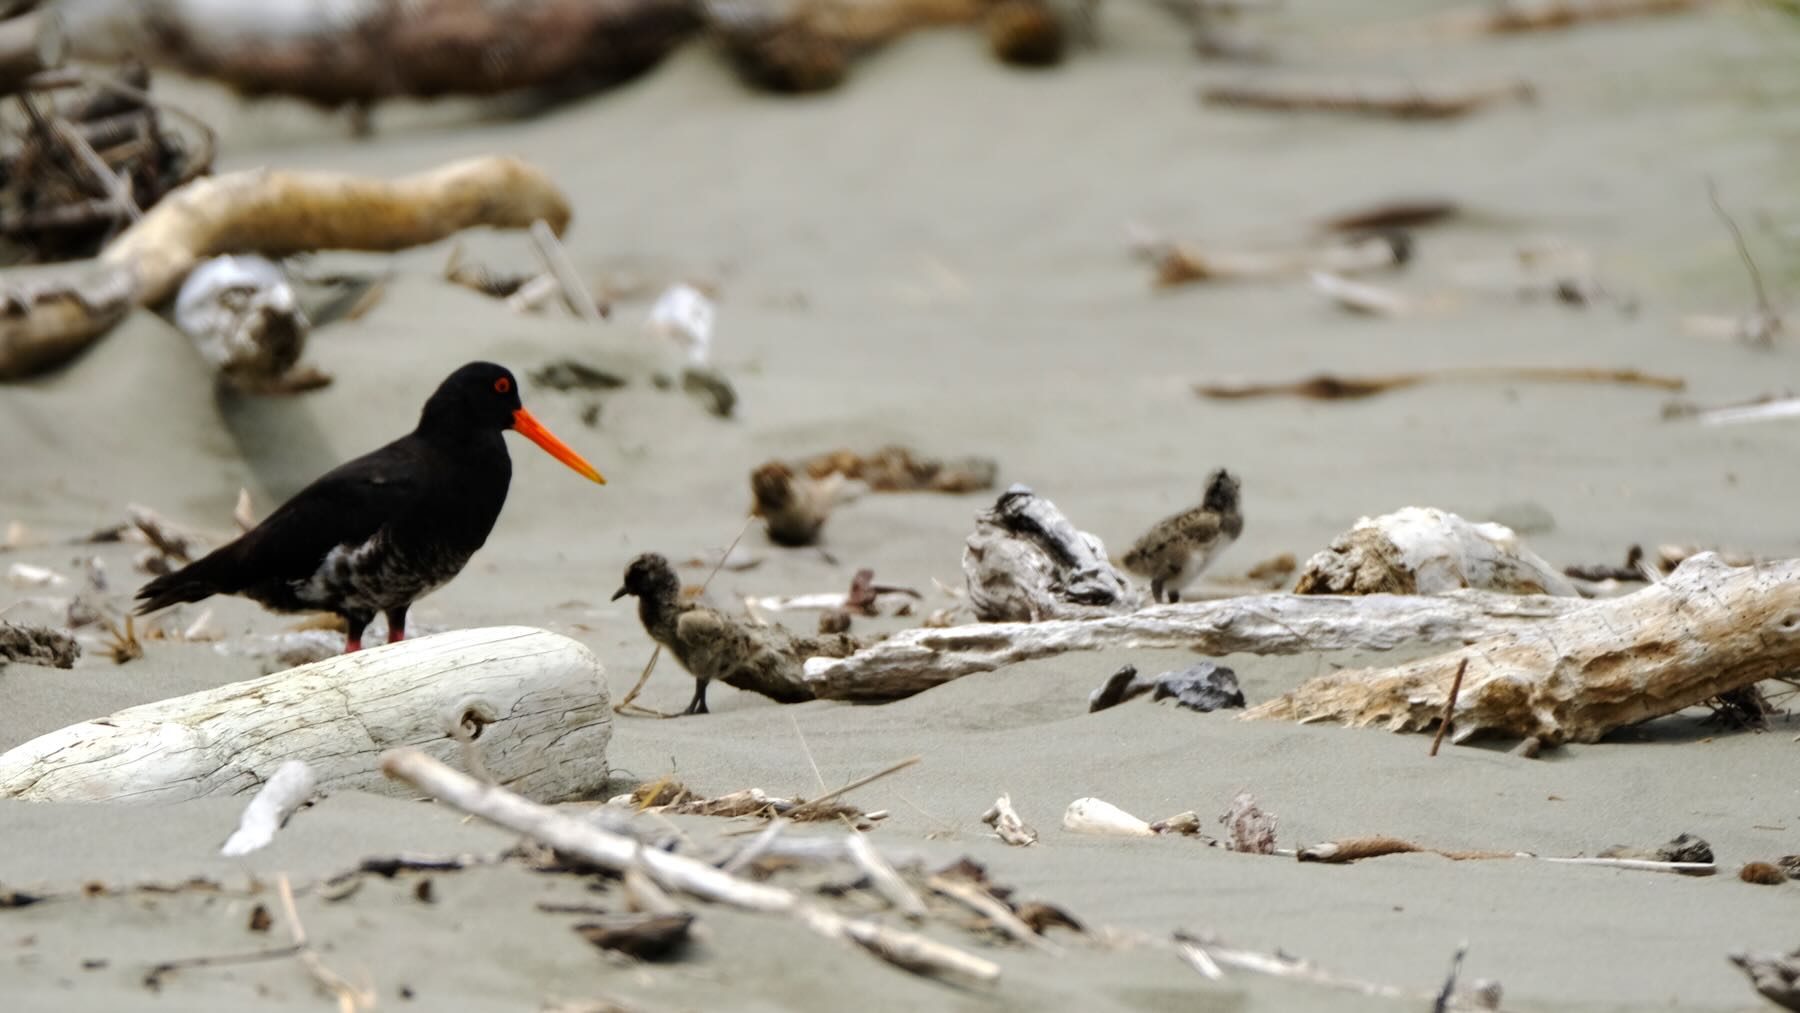 Adult Oystercatcher with 2 chick, on sand amongst driftwood. 